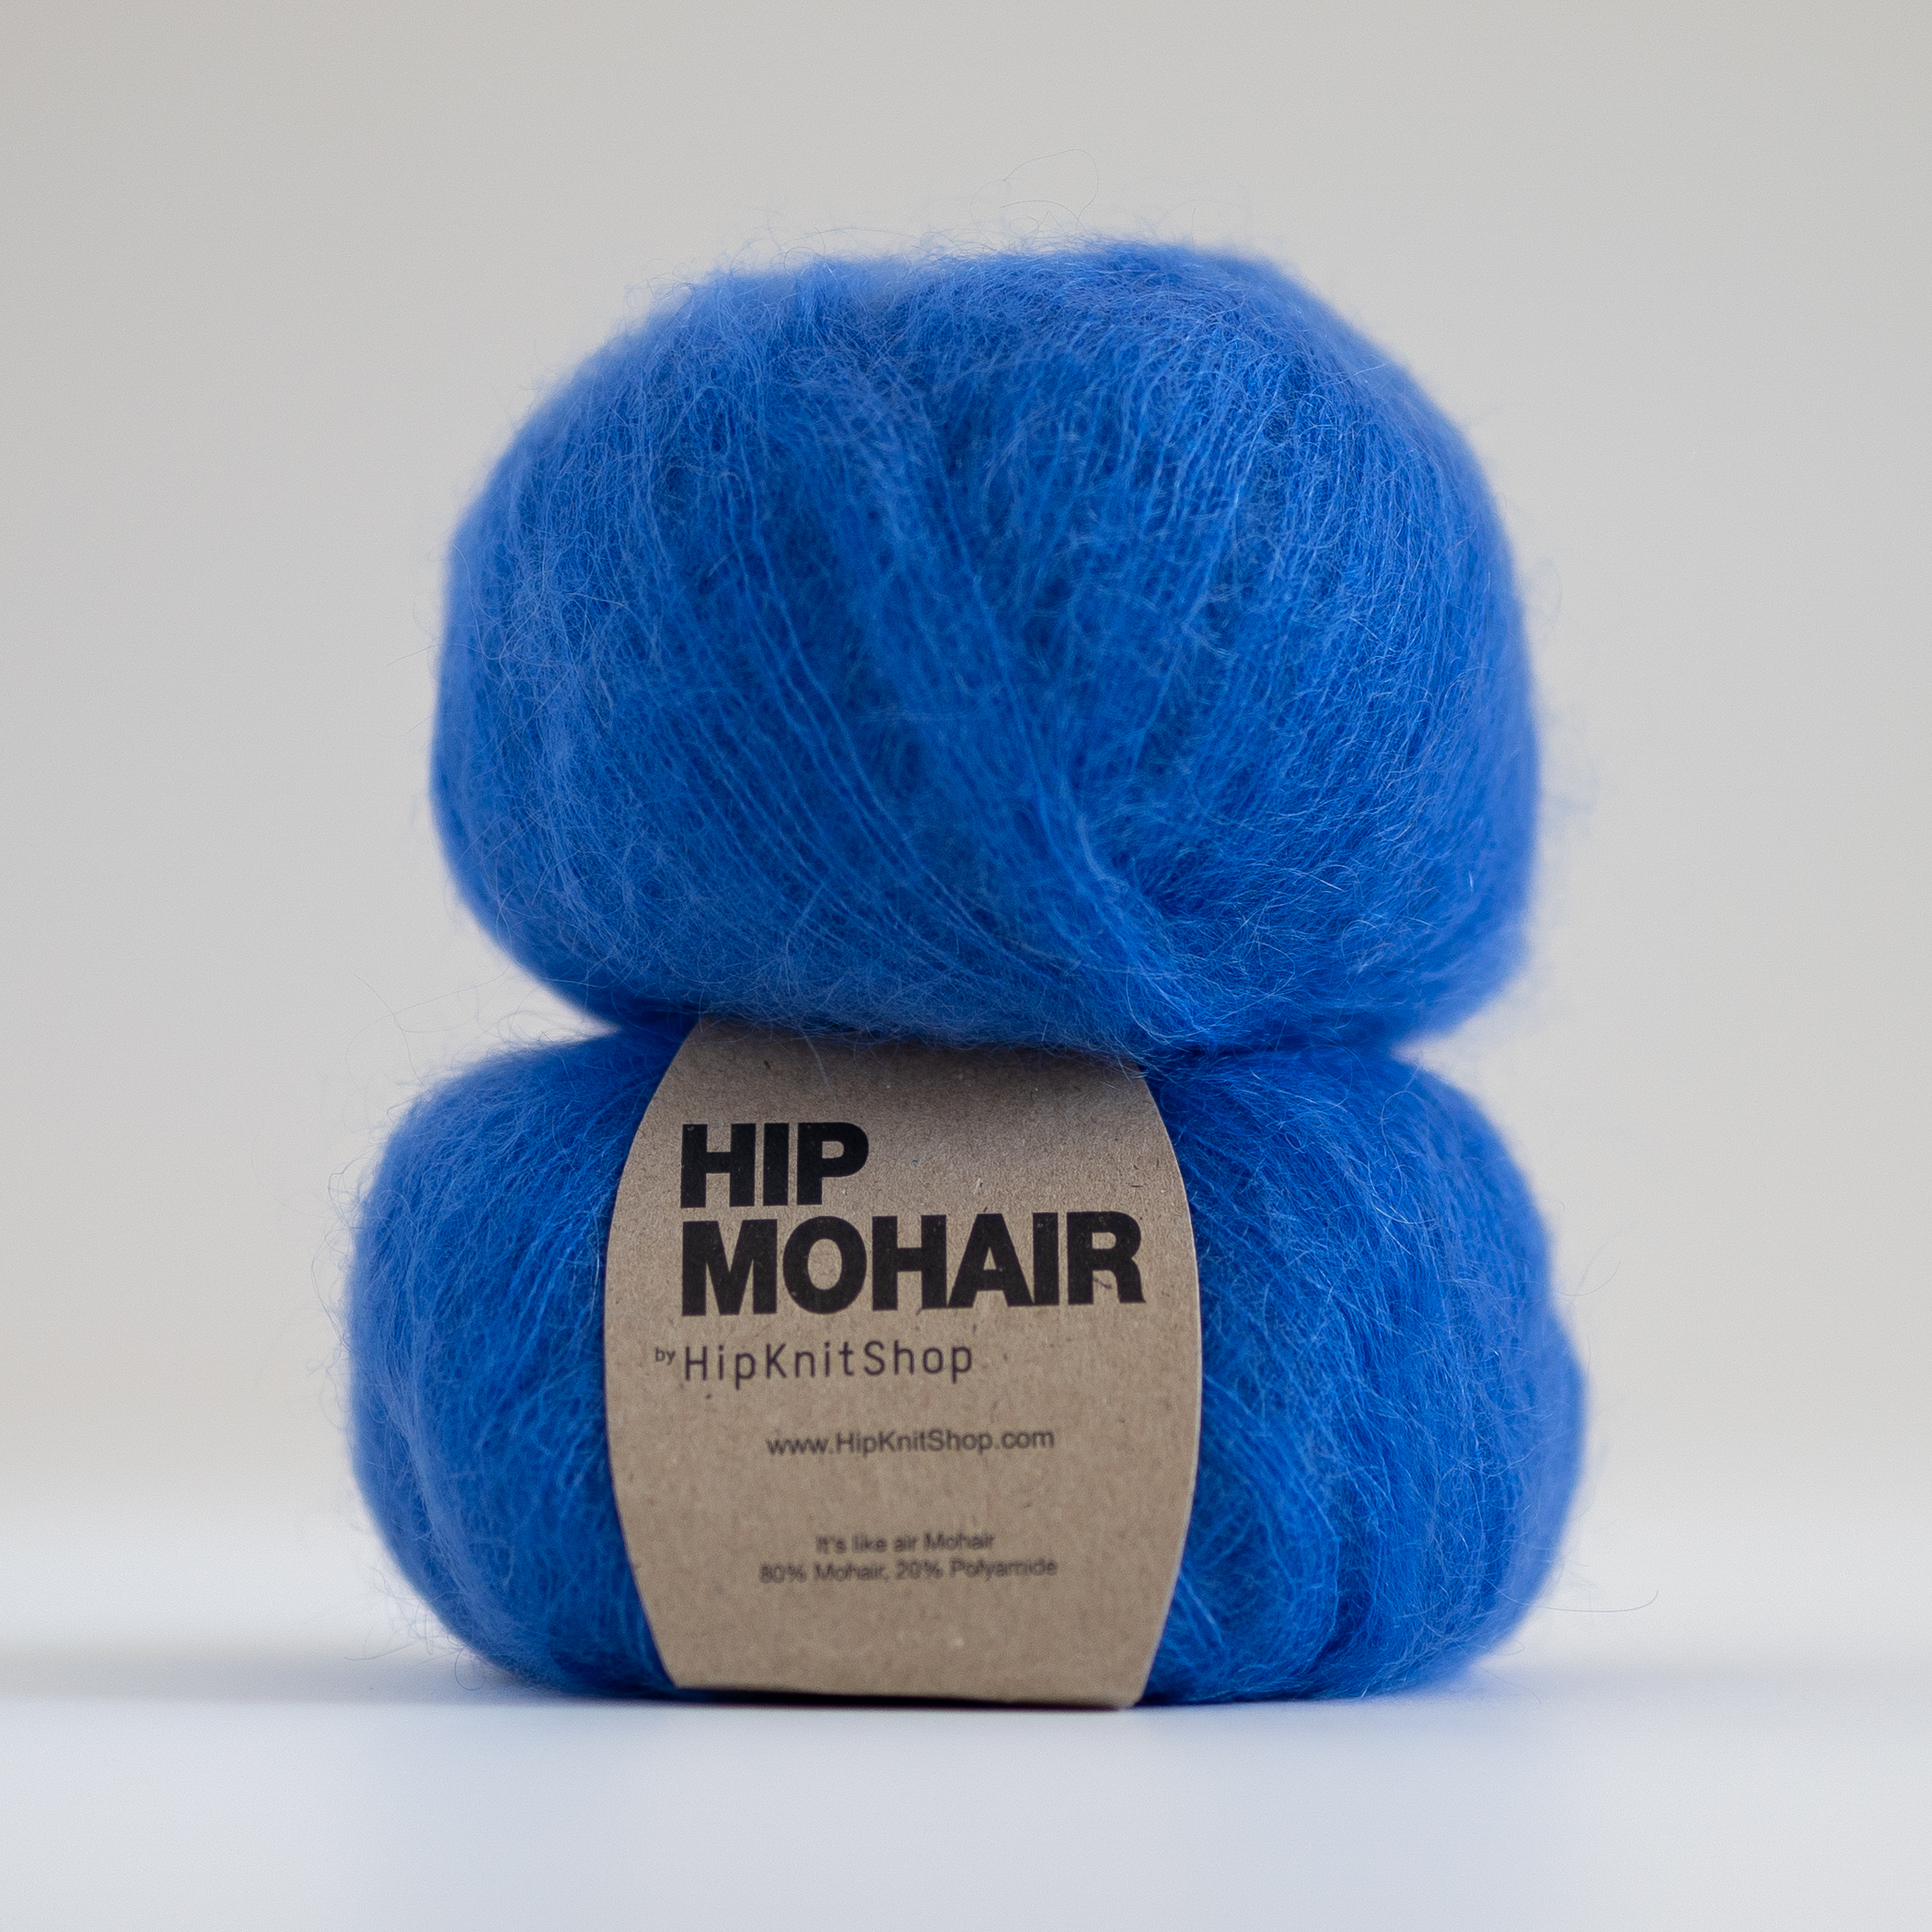  - Bubbly blue mohair | Hip Mohair blue yarn - by HipKnitShop - 02/07/2019